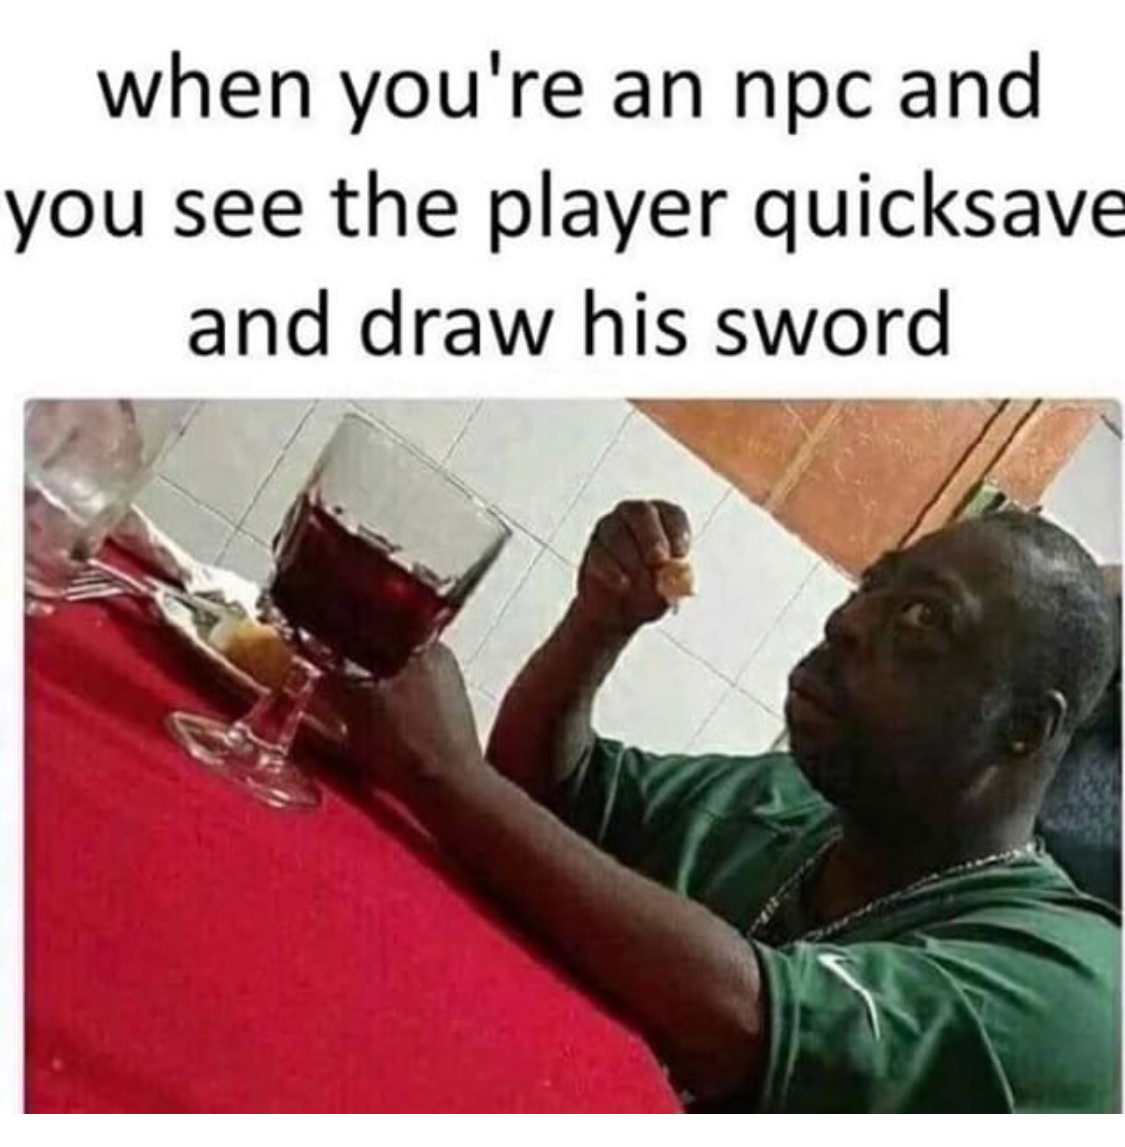 you re an npc - when you're an npc and you see the player quicksave and draw his sword